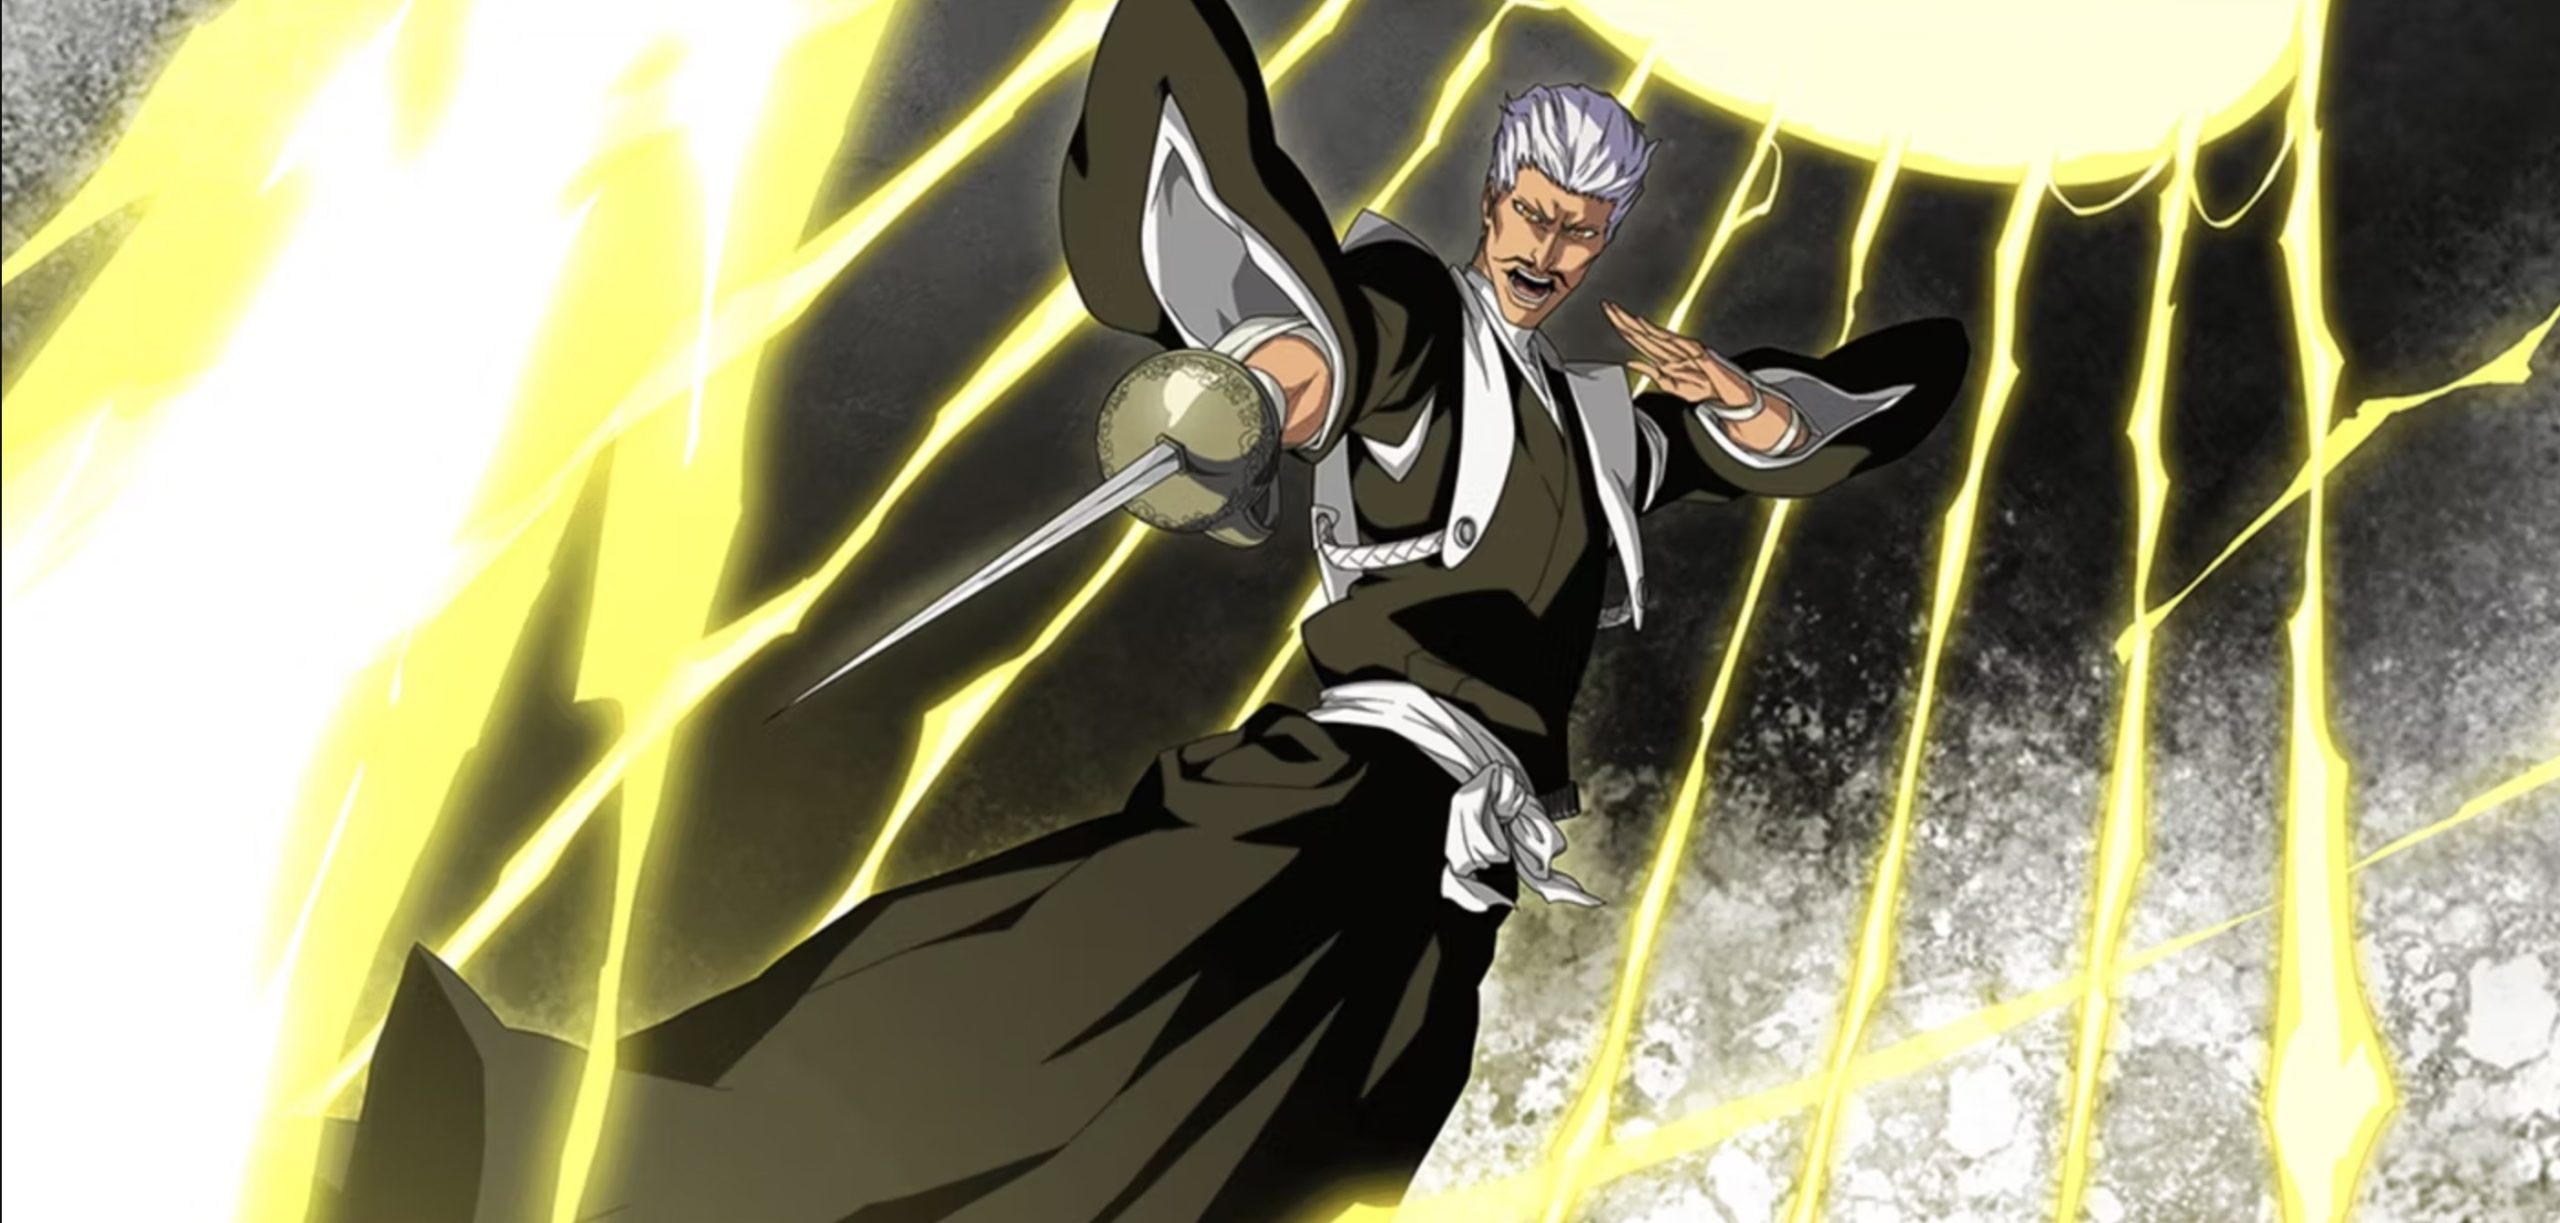 1705829532 974 Top 15 Significant Character Deaths in Bleach War Arc